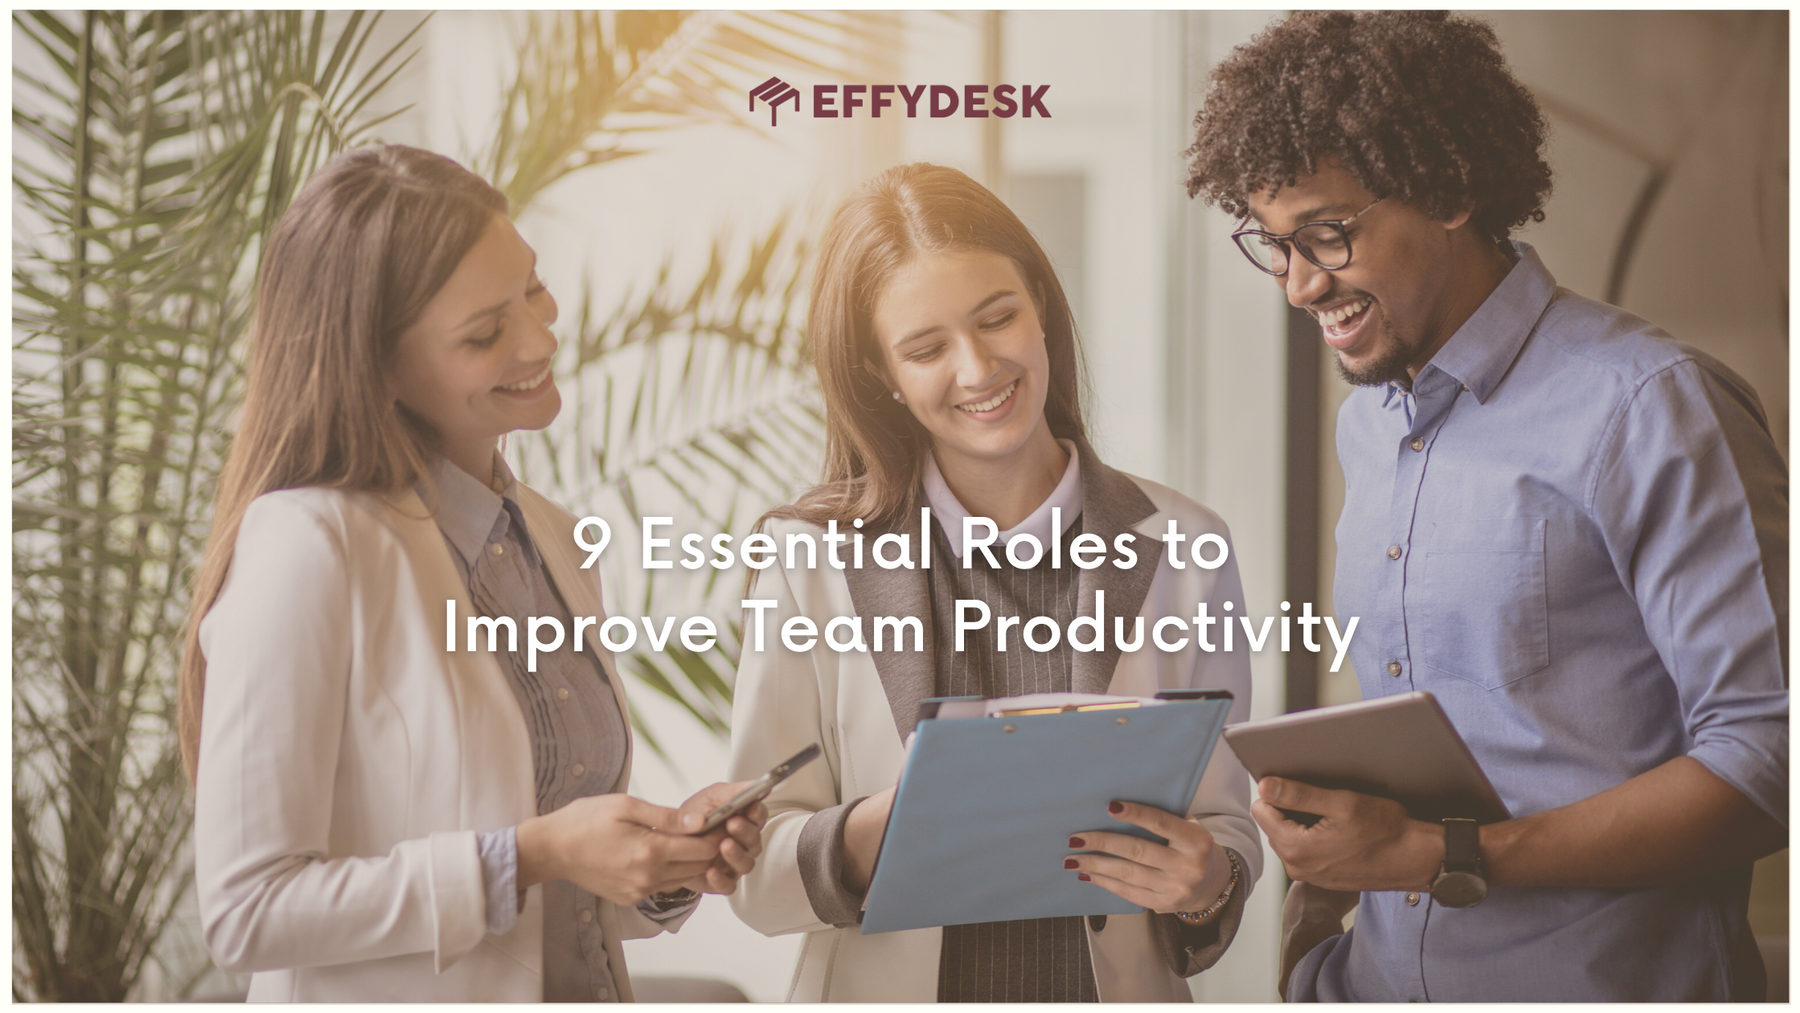 Important roles that can improve team productivity in your company